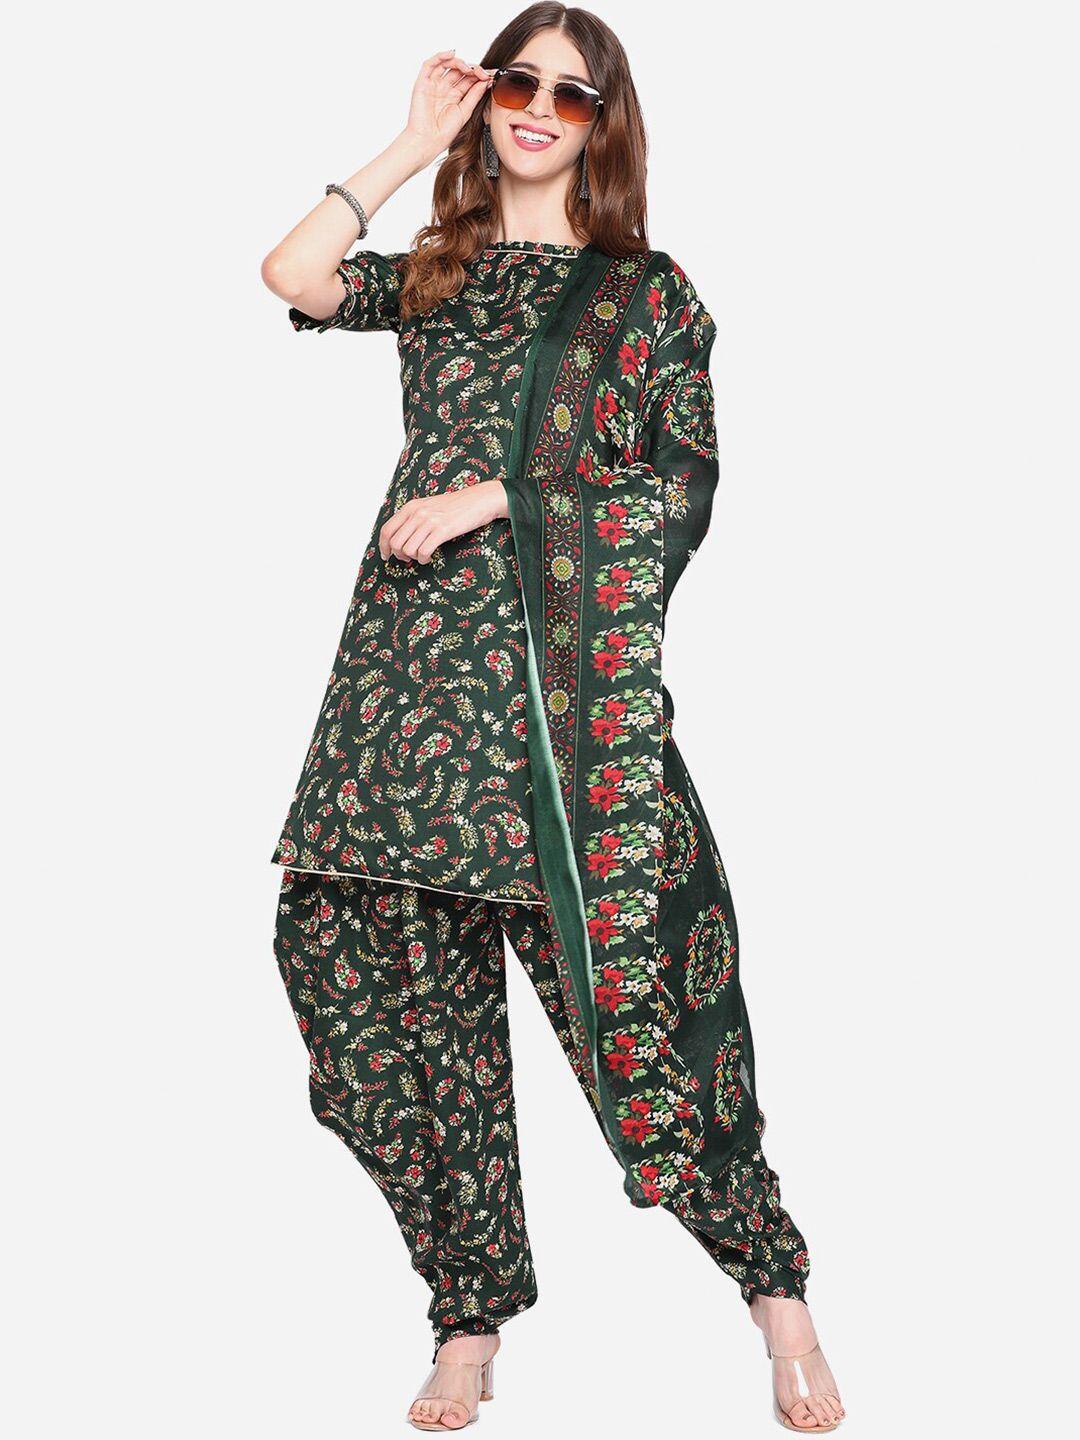 shavya olive green & red printed pure cotton unstitched dress material